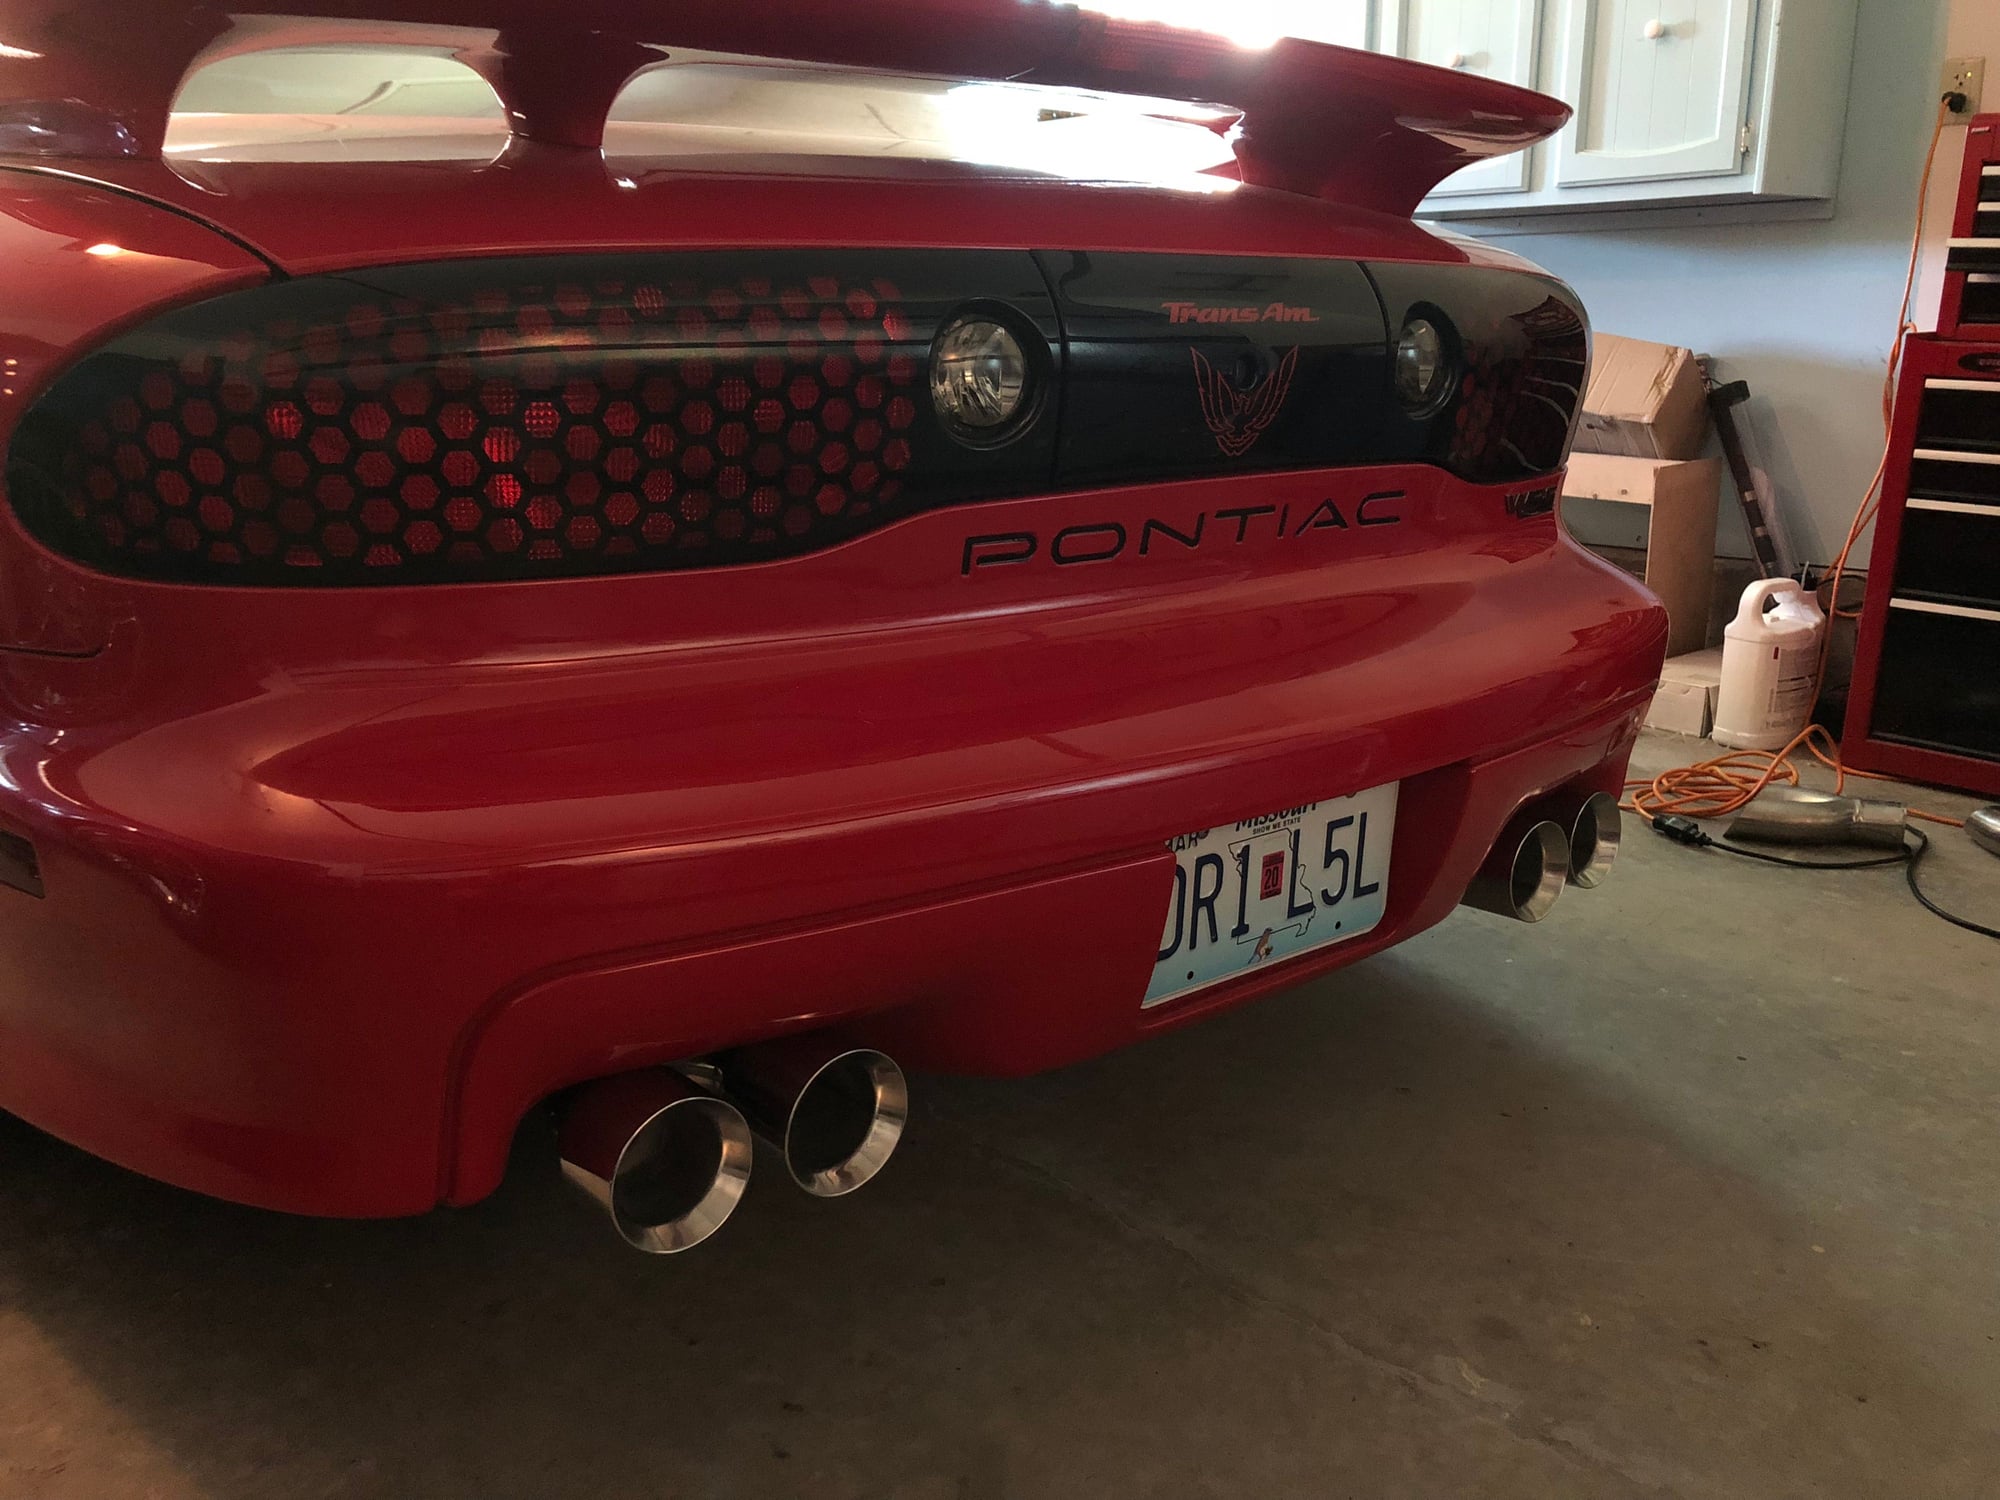 1998 Pontiac Firebird - 1998 Trans Am WS6 - Used - VIN 123455677899 - 36,000 Miles - 8 cyl - 2WD - Manual - Coupe - Red - Enid, OK 73703, United States